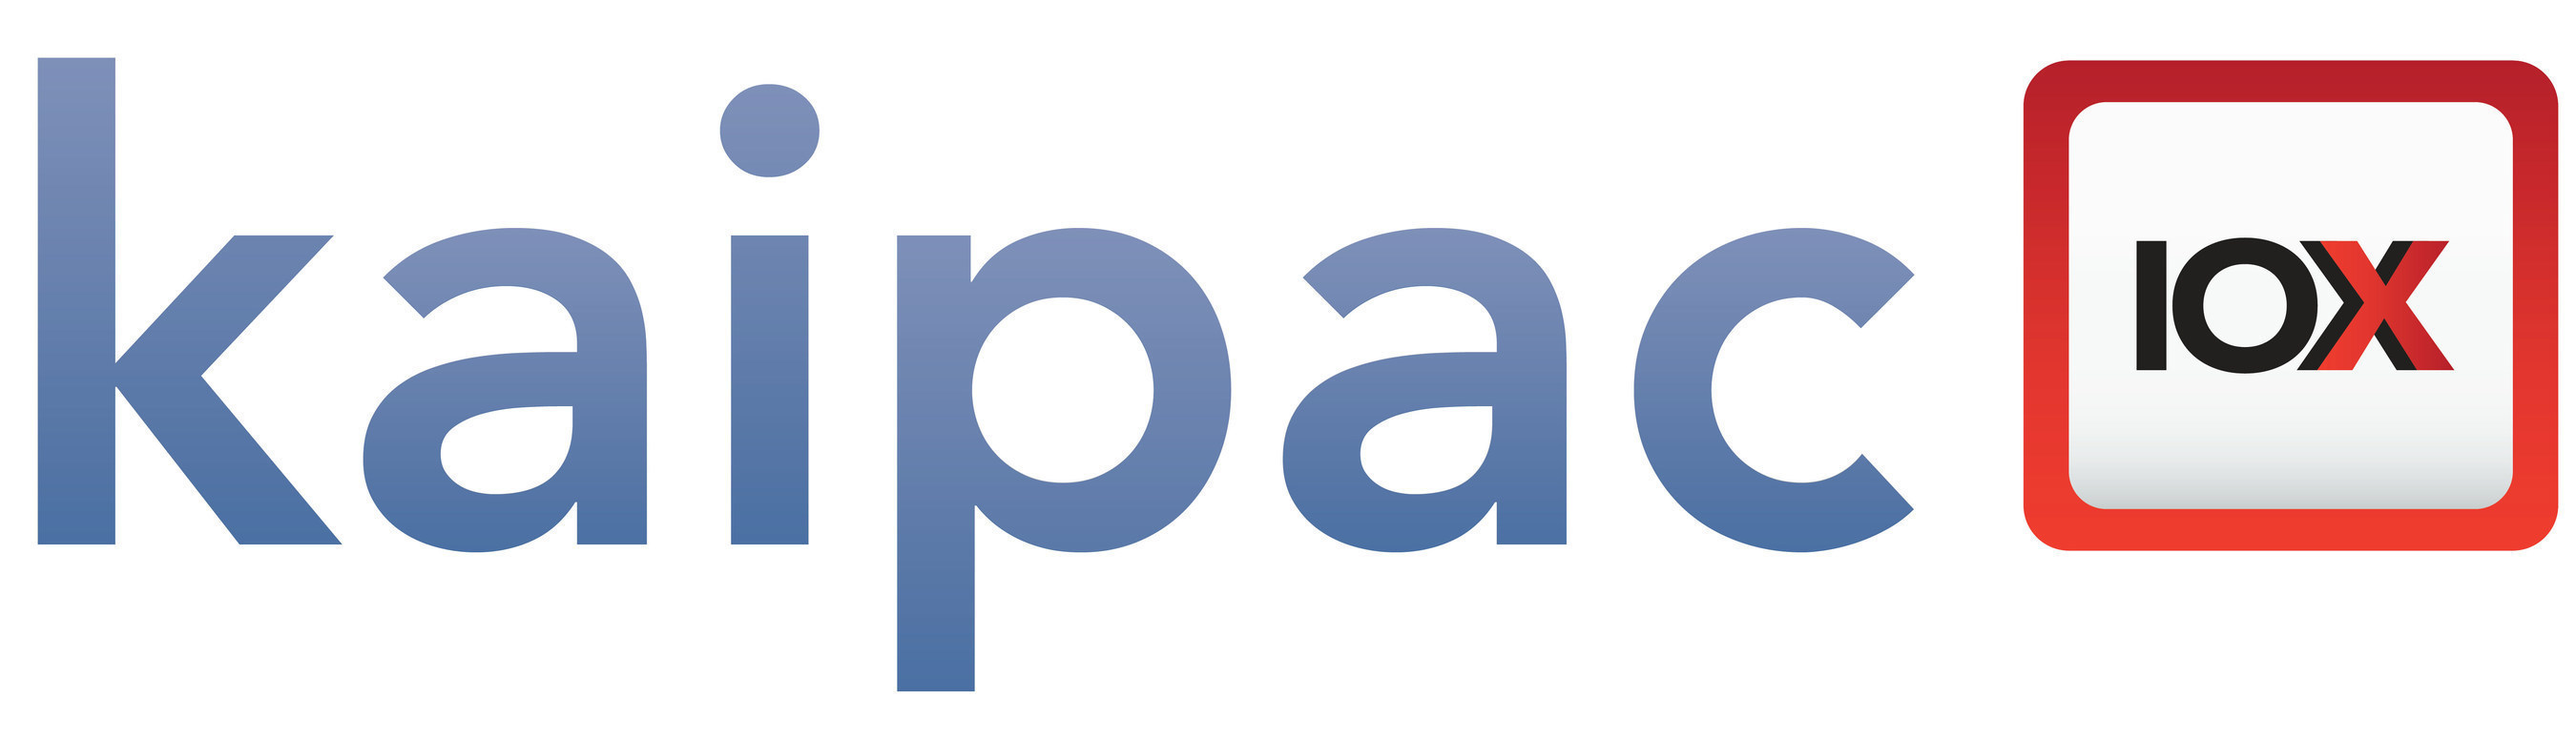 Kaipac delivers "Communications for the Communications industry", enabling workforce-collaboration between network operators and their vendors, streamlining the sharing of time sensitive, proprietary data related to network health and system optimization.